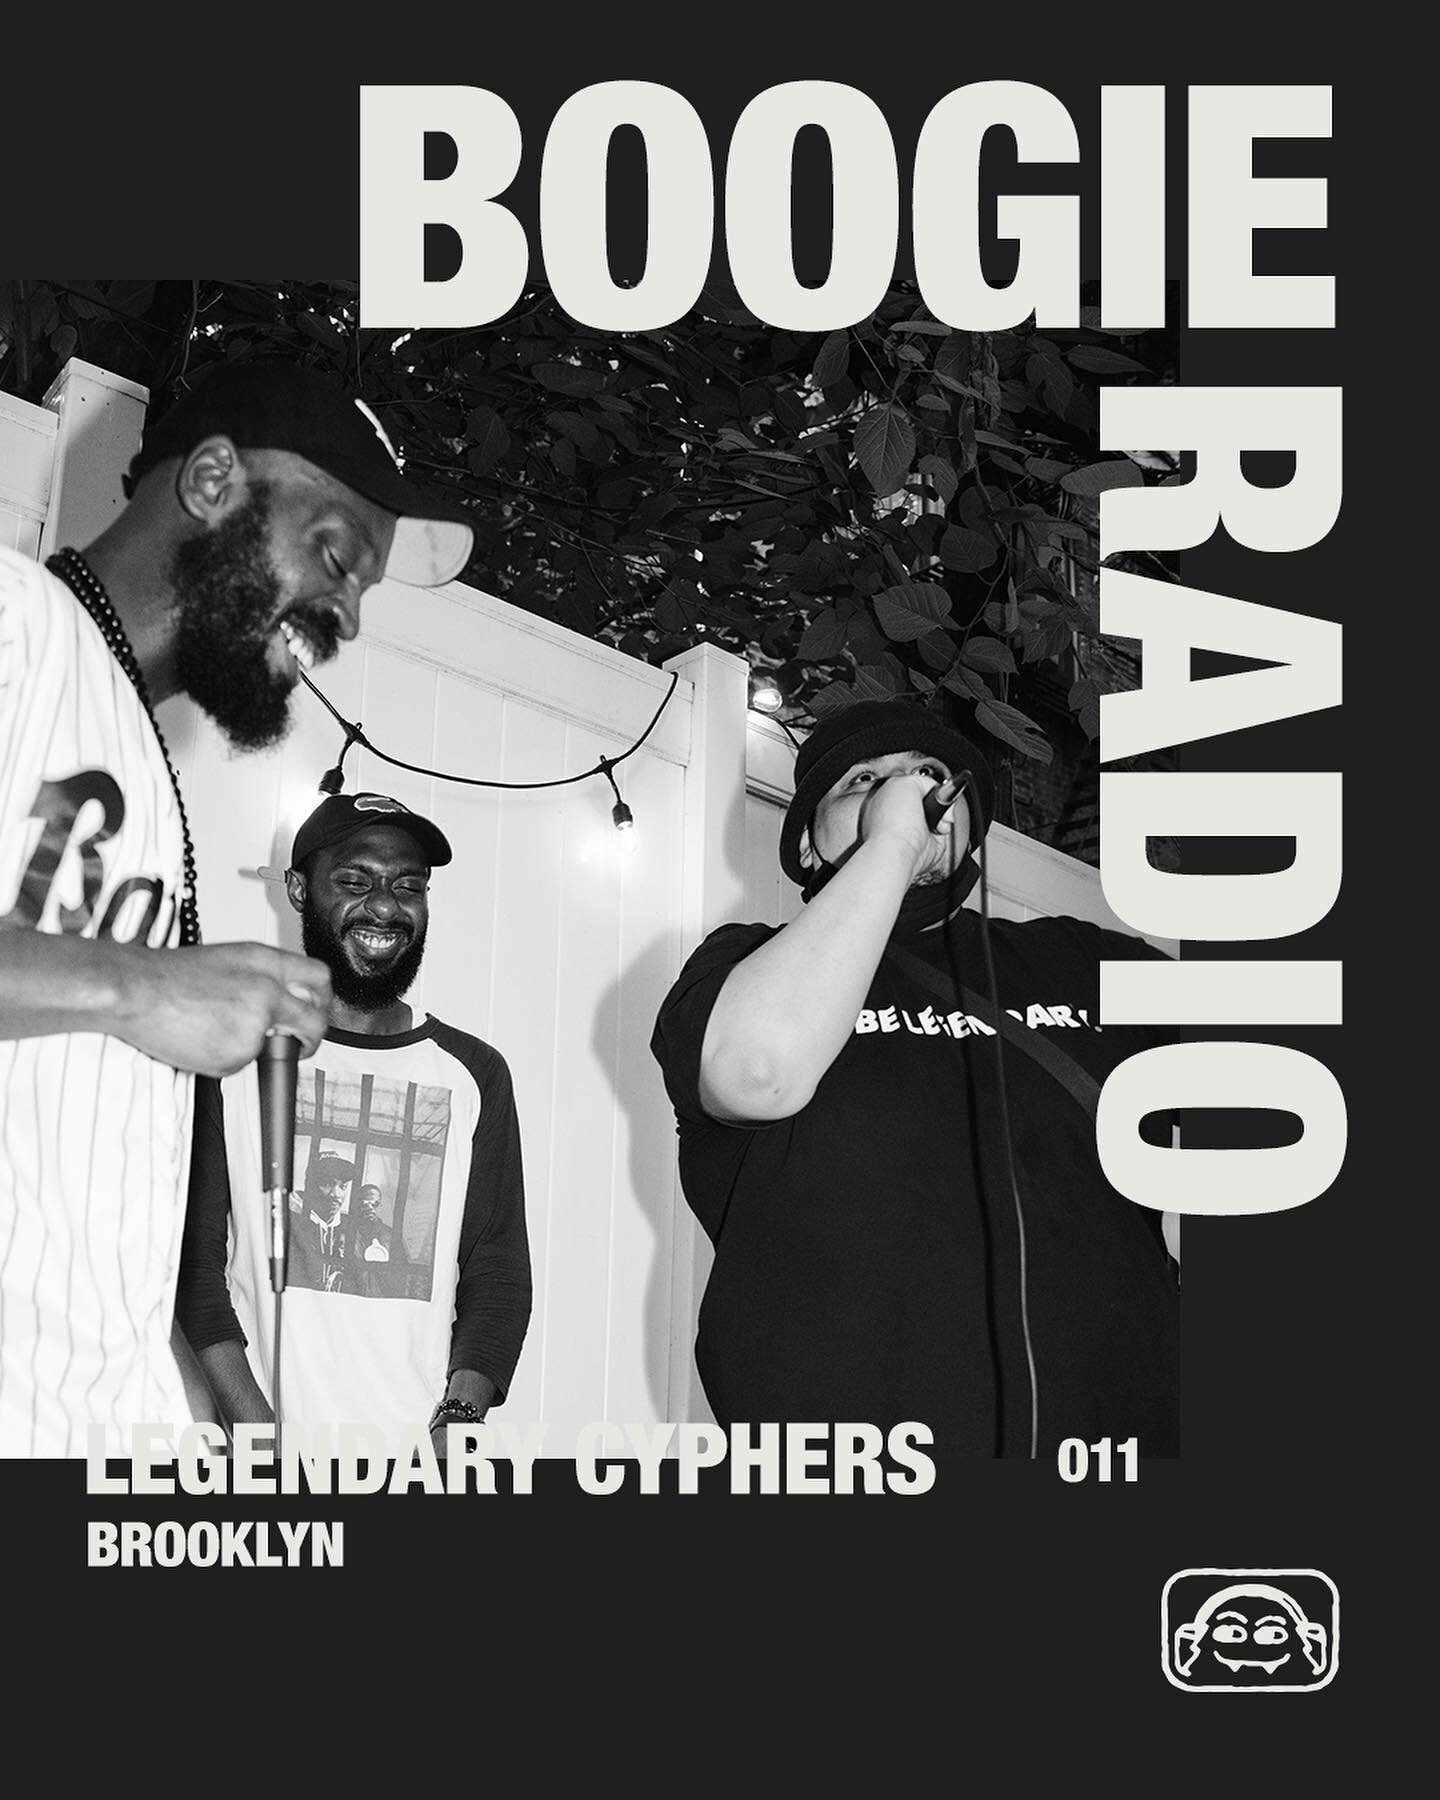 We&rsquo;re back with Boogie Radio 011 featuring the  @legendarycyphers360 collective&hellip;live from our Boogie in July 👉

Legendary Cyphers is a NYC-based Hip Hop organization that orchestrates freestyle rap and occasional singing, dancing, beatb